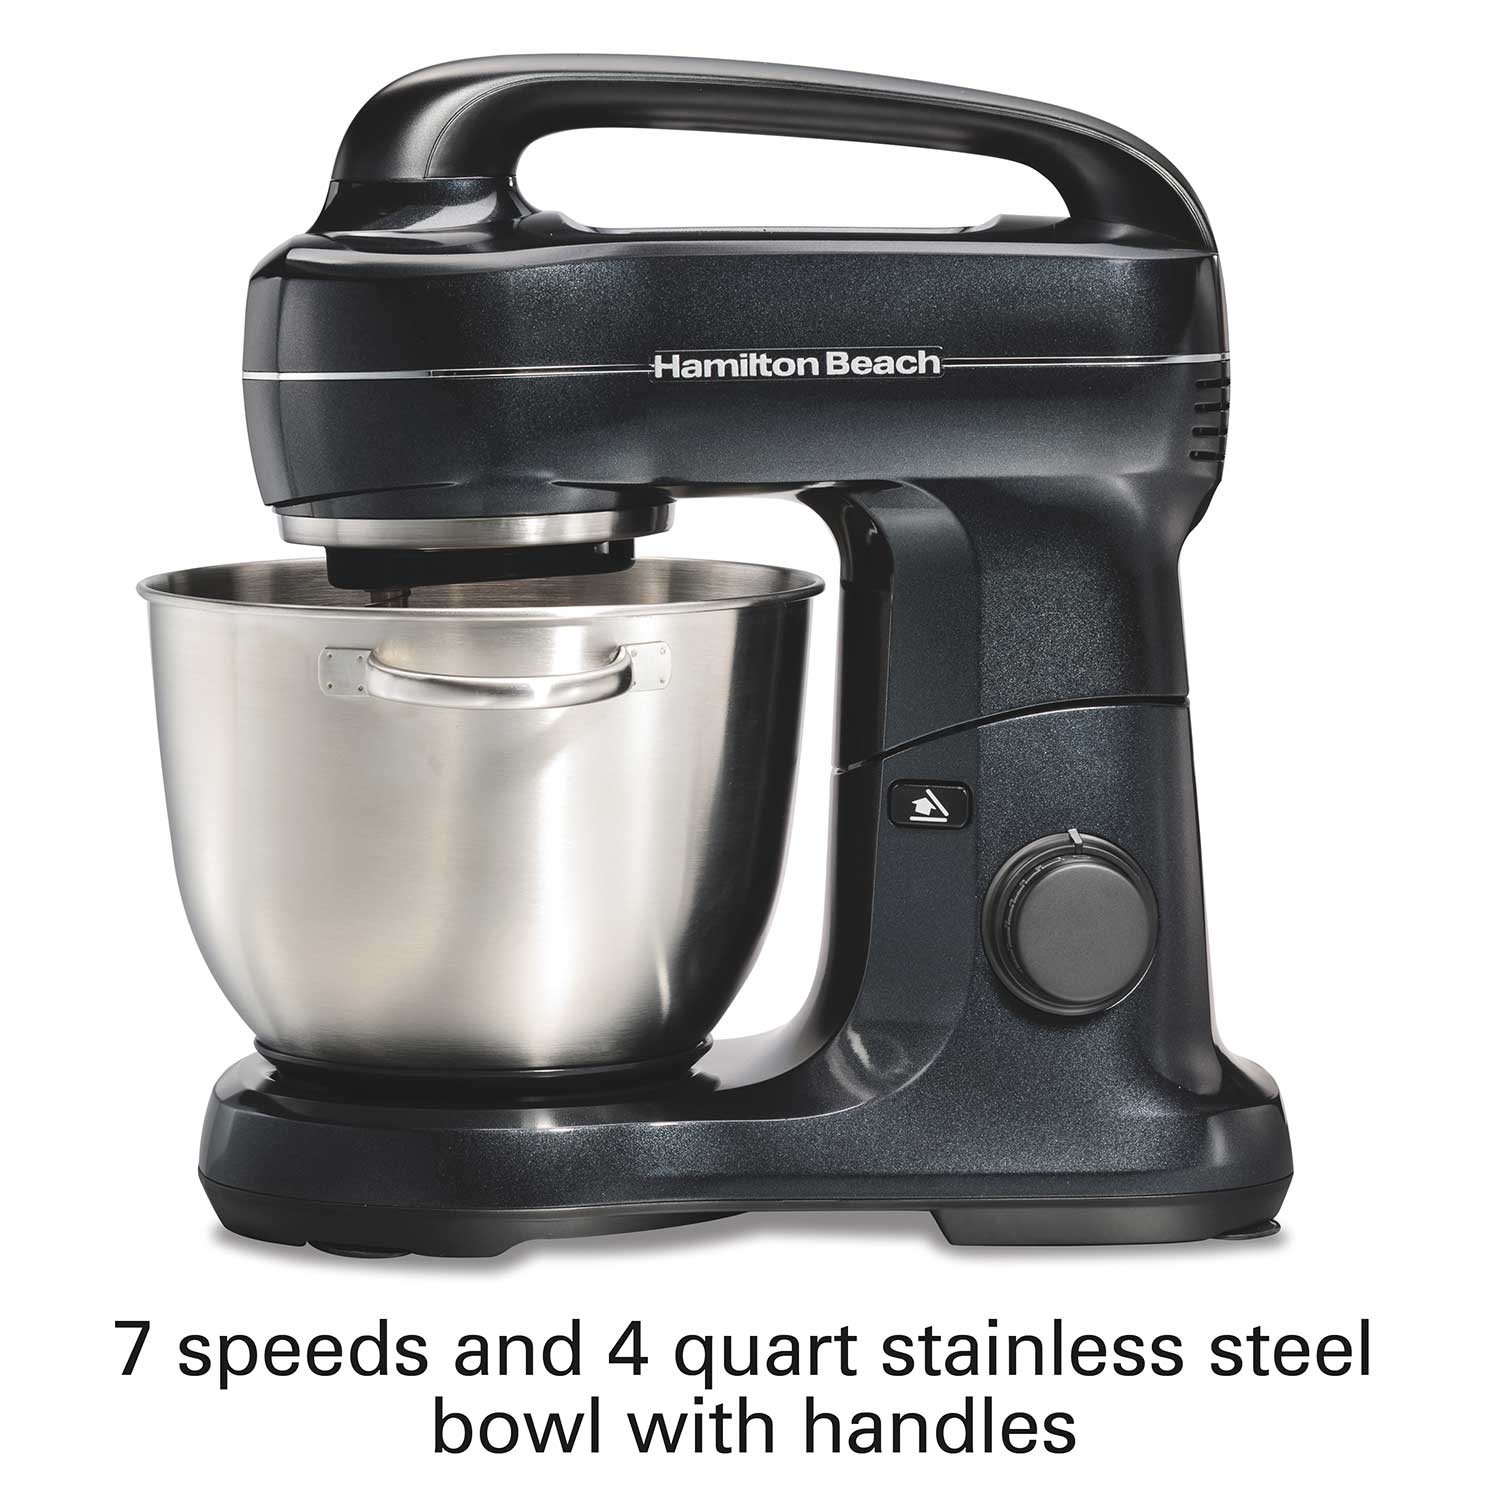 Hamilton Beach Electric Stand Mixer with 4 Quart Stainless Bowl, 7 Speeds,  Whisk, Dough Hook, and Flat Beater Attachments, Splash Guard, 300 Watts,  Blue, 63393 